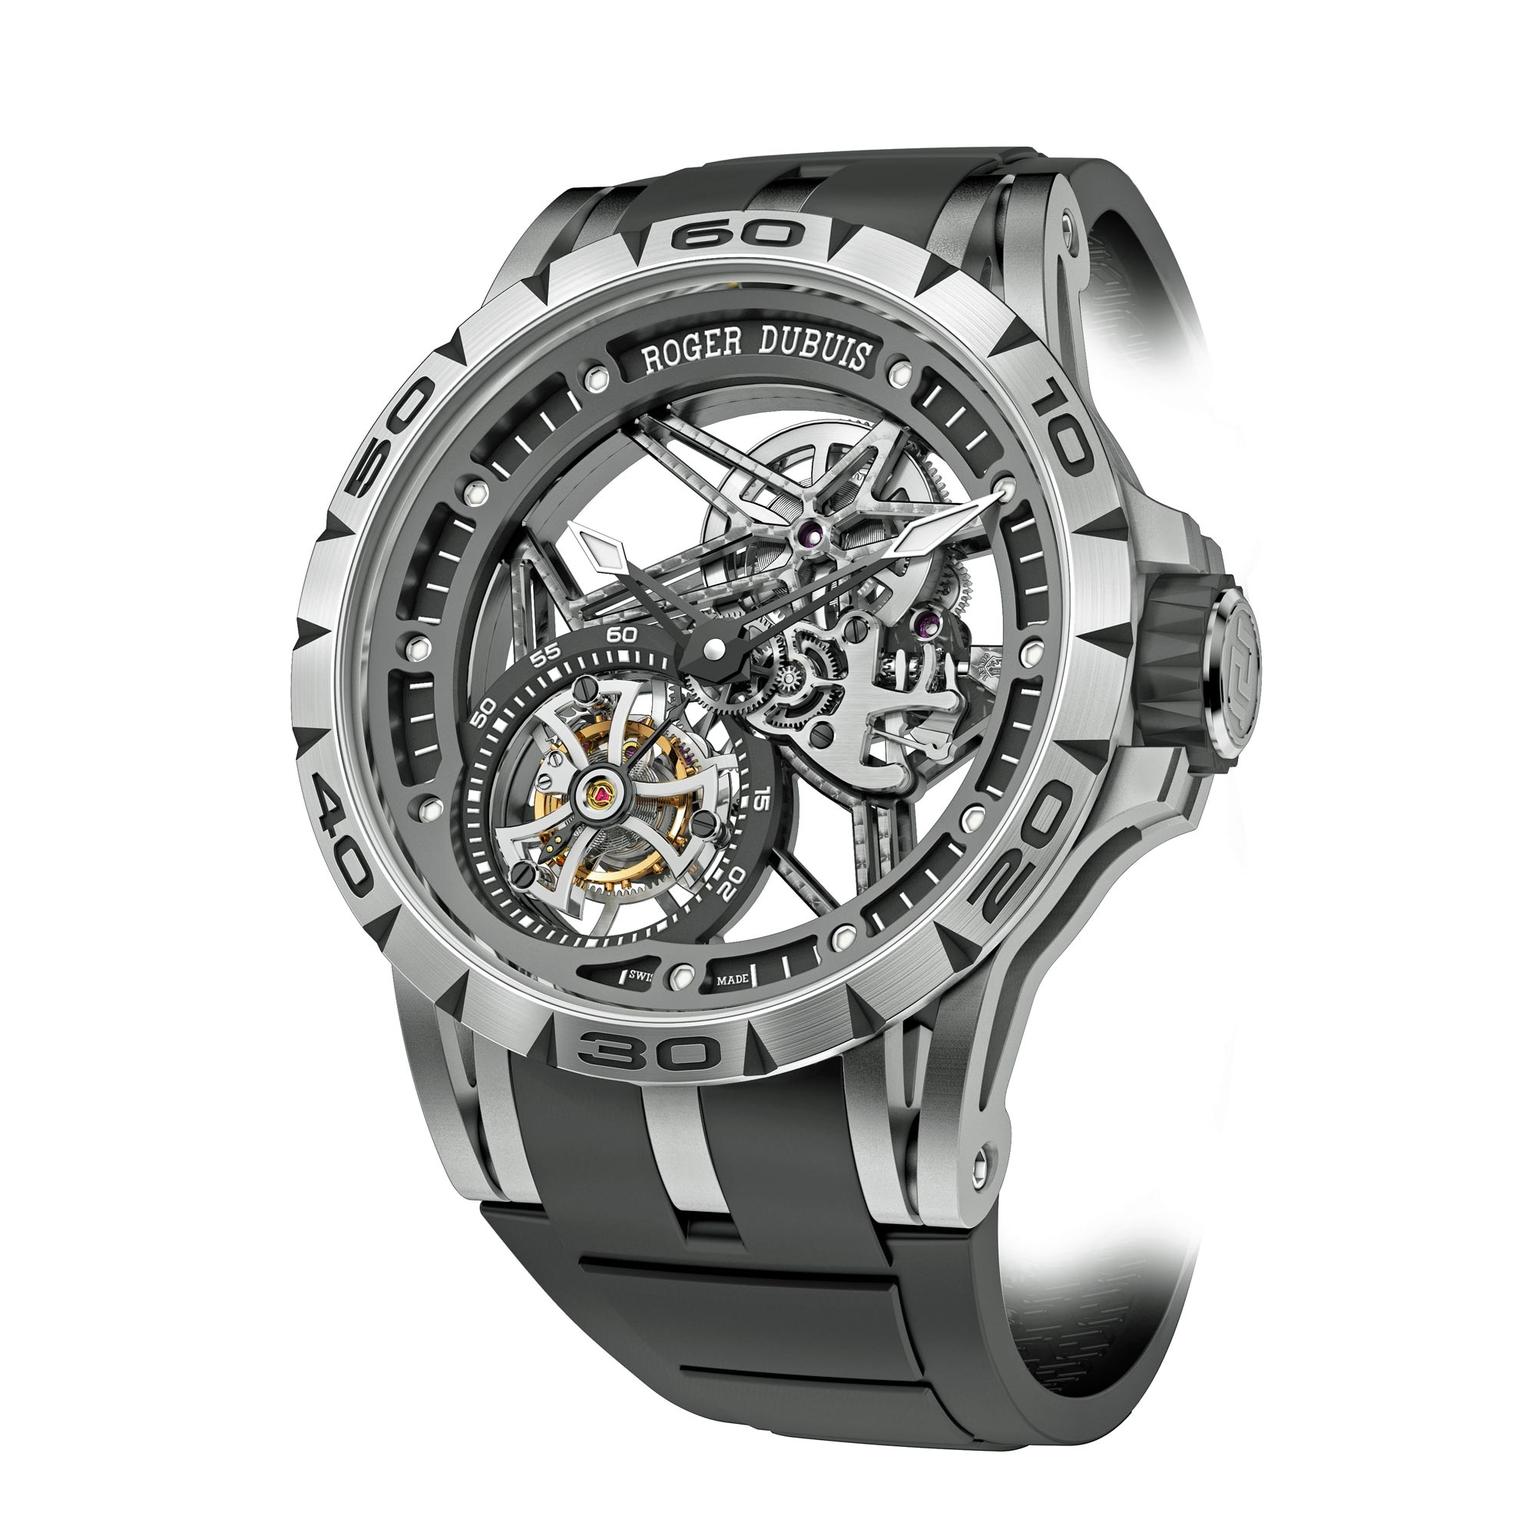 Roger Dubuis Spider watch